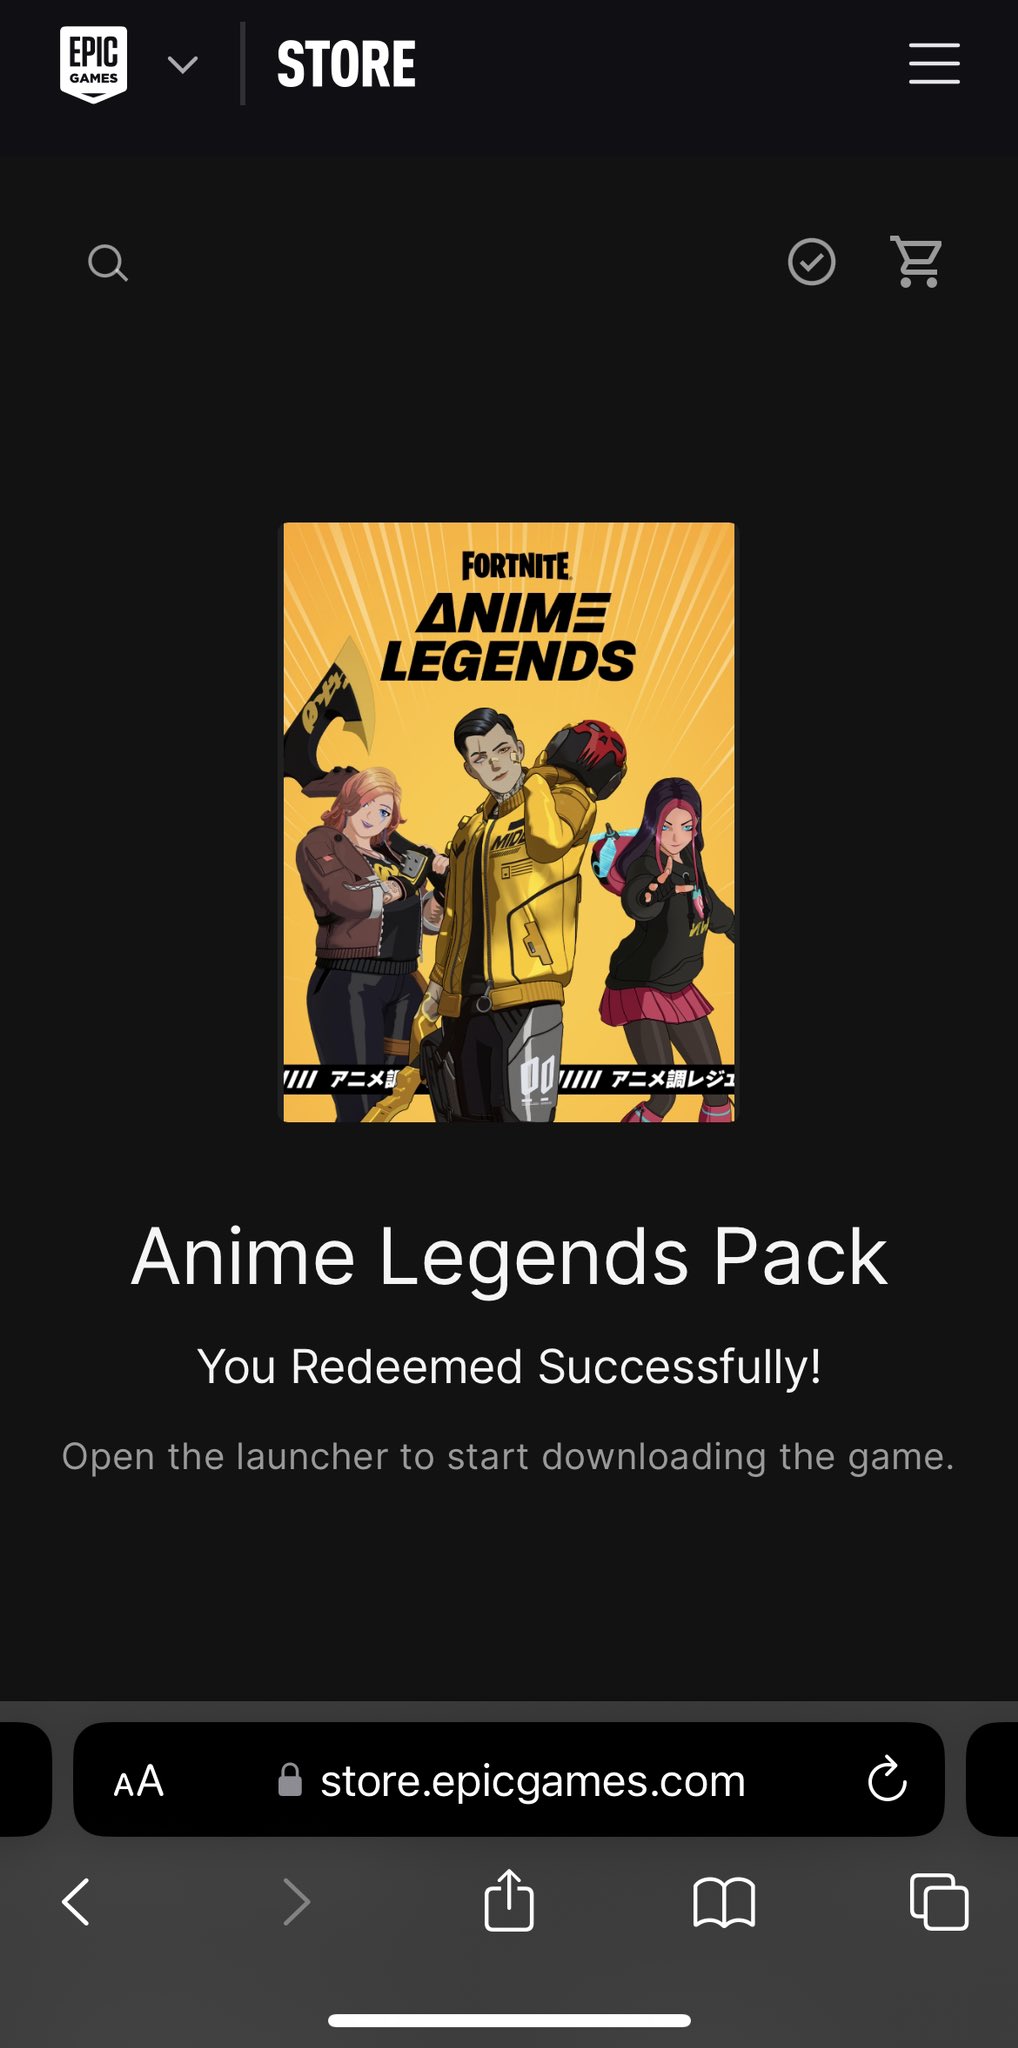 Anime Legends Pack - Epic Games Store